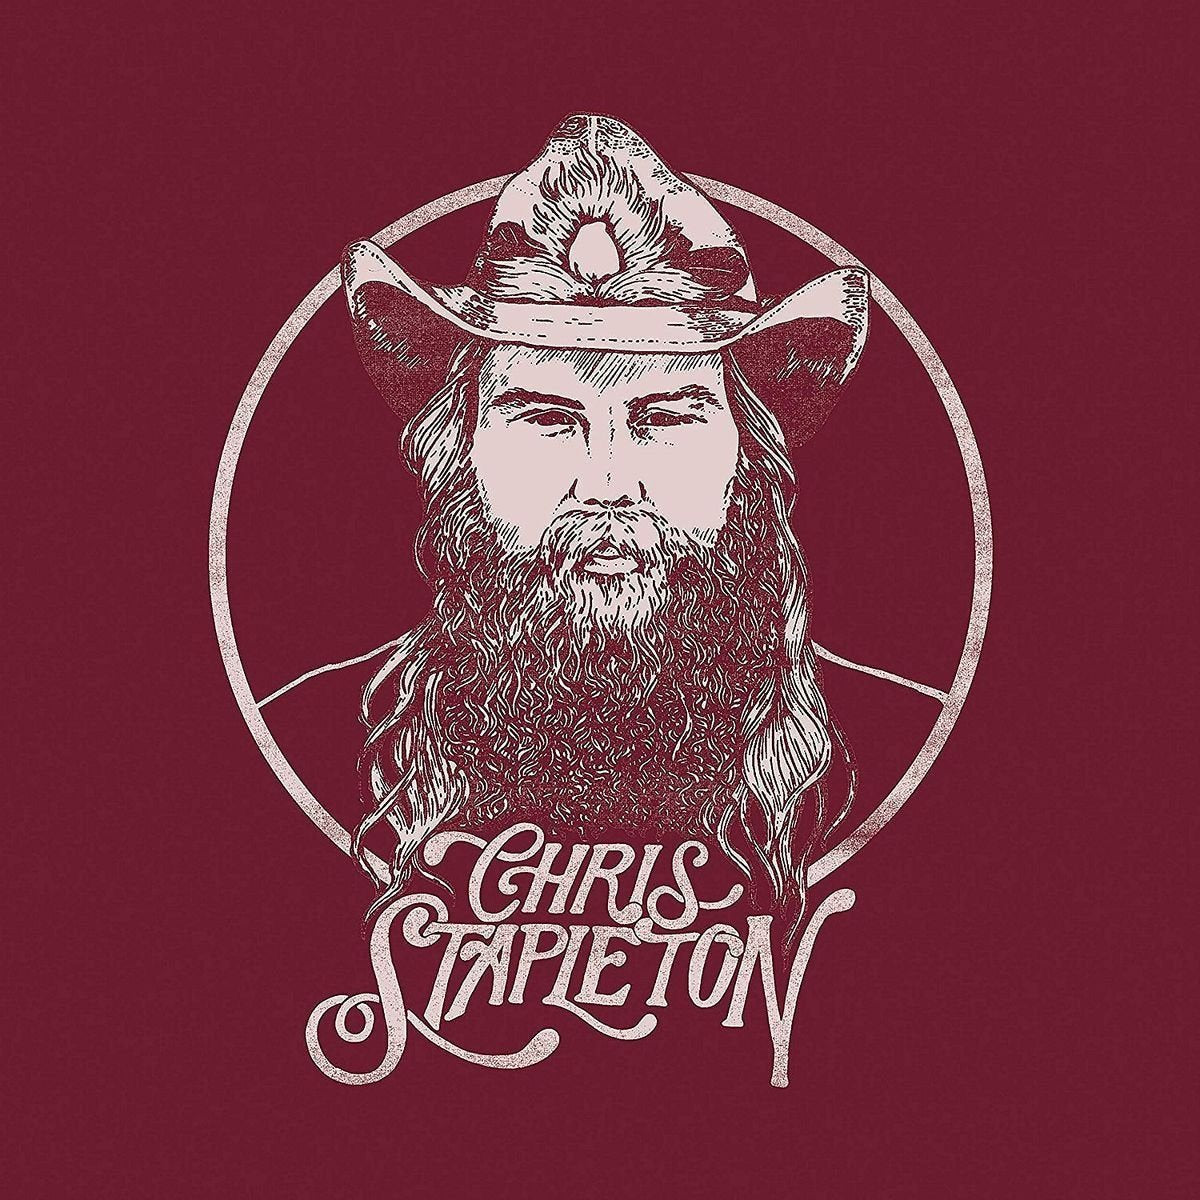 Chris Stapleton ‎– From A Room: Volume 2 - New LP Record 2017 Mercury Vinyl & Download - Country Rock / Blues Rock